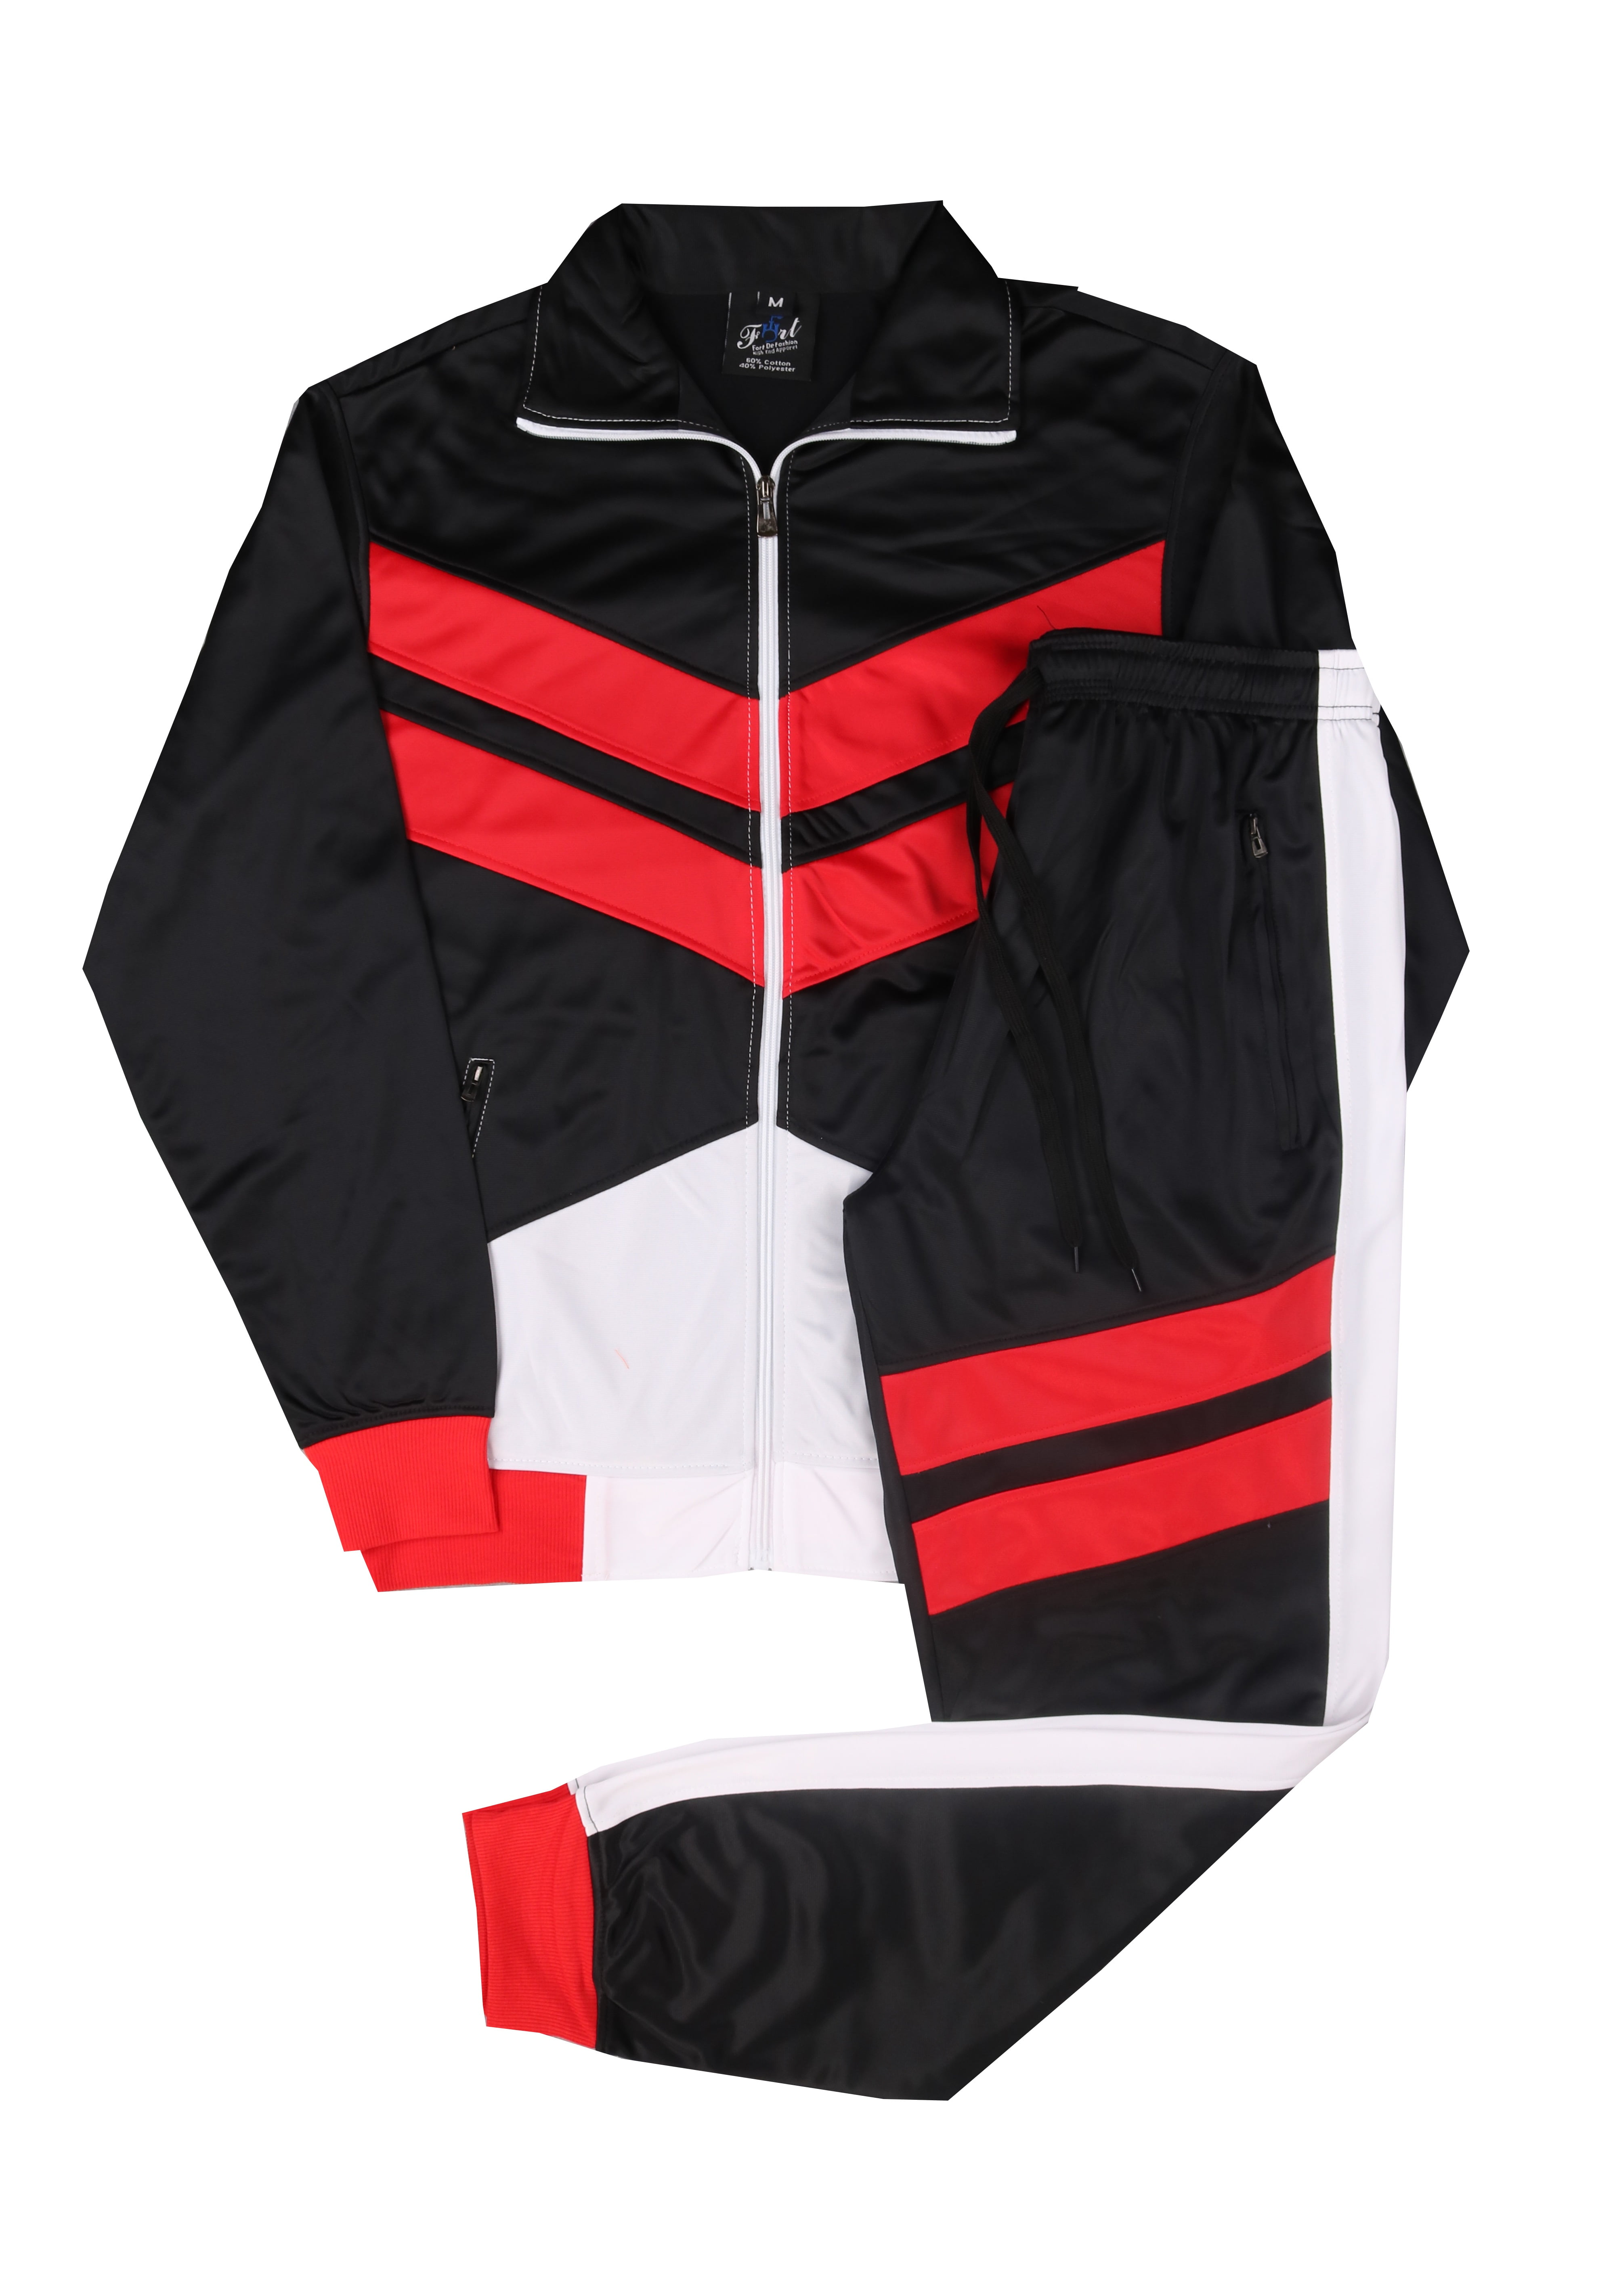 CLASSIC PENAL STYLE TRACKSUIT WITH S UPTO 4XL - Walmart.com